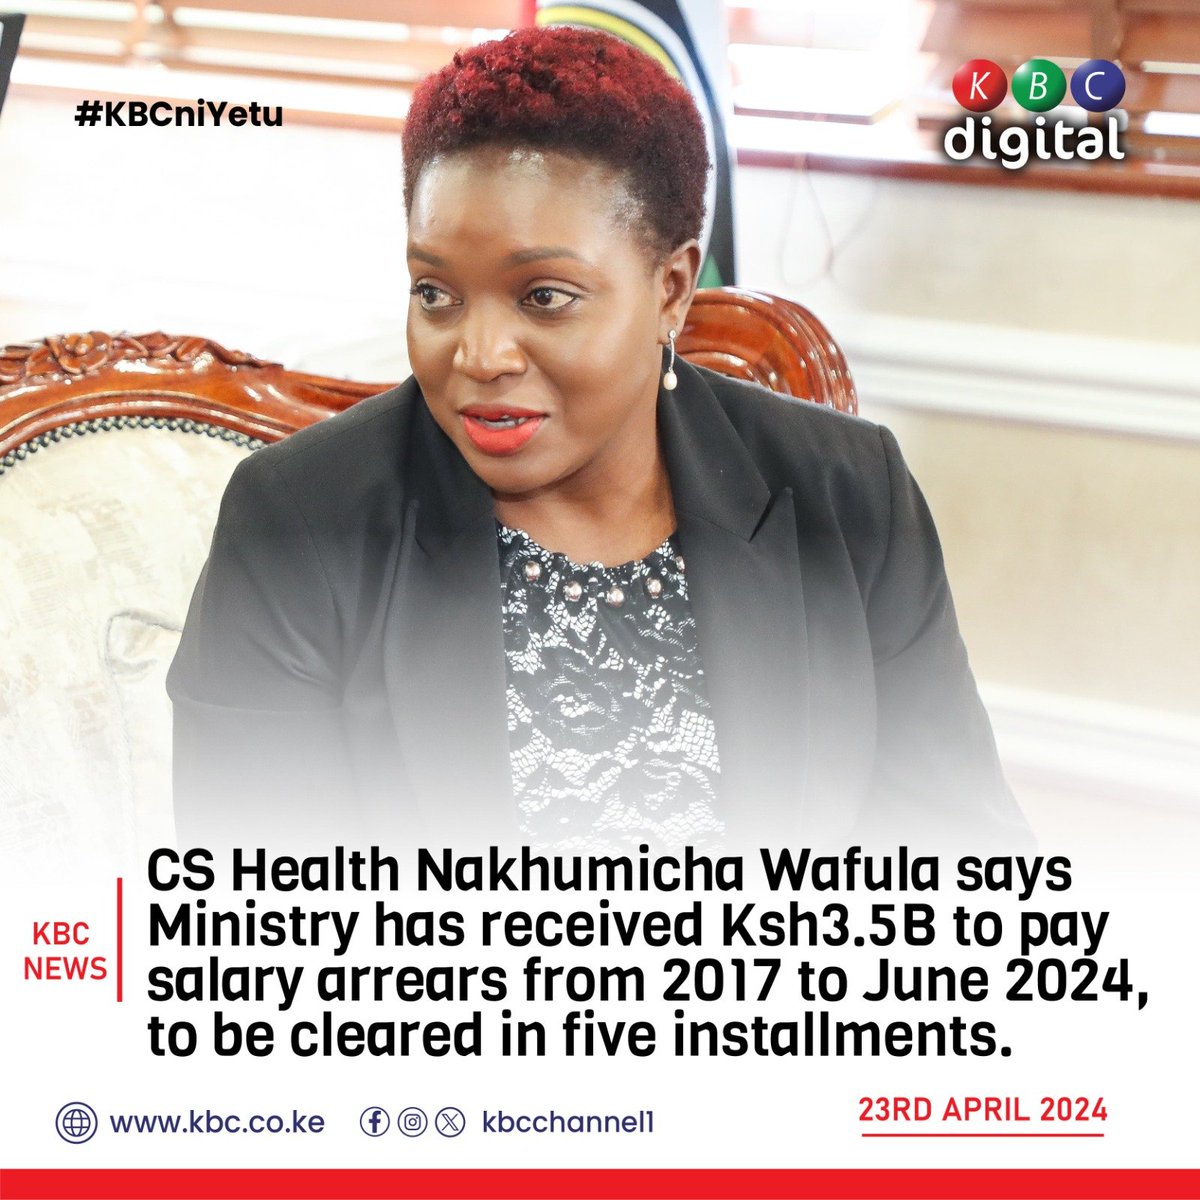 CS Health Nakhumicha Wafula says Ministry has received Ksh3.5B to pay salary arrears from 2017 to June 2024, to be cleared in five installments. #KBCniYetu^EM